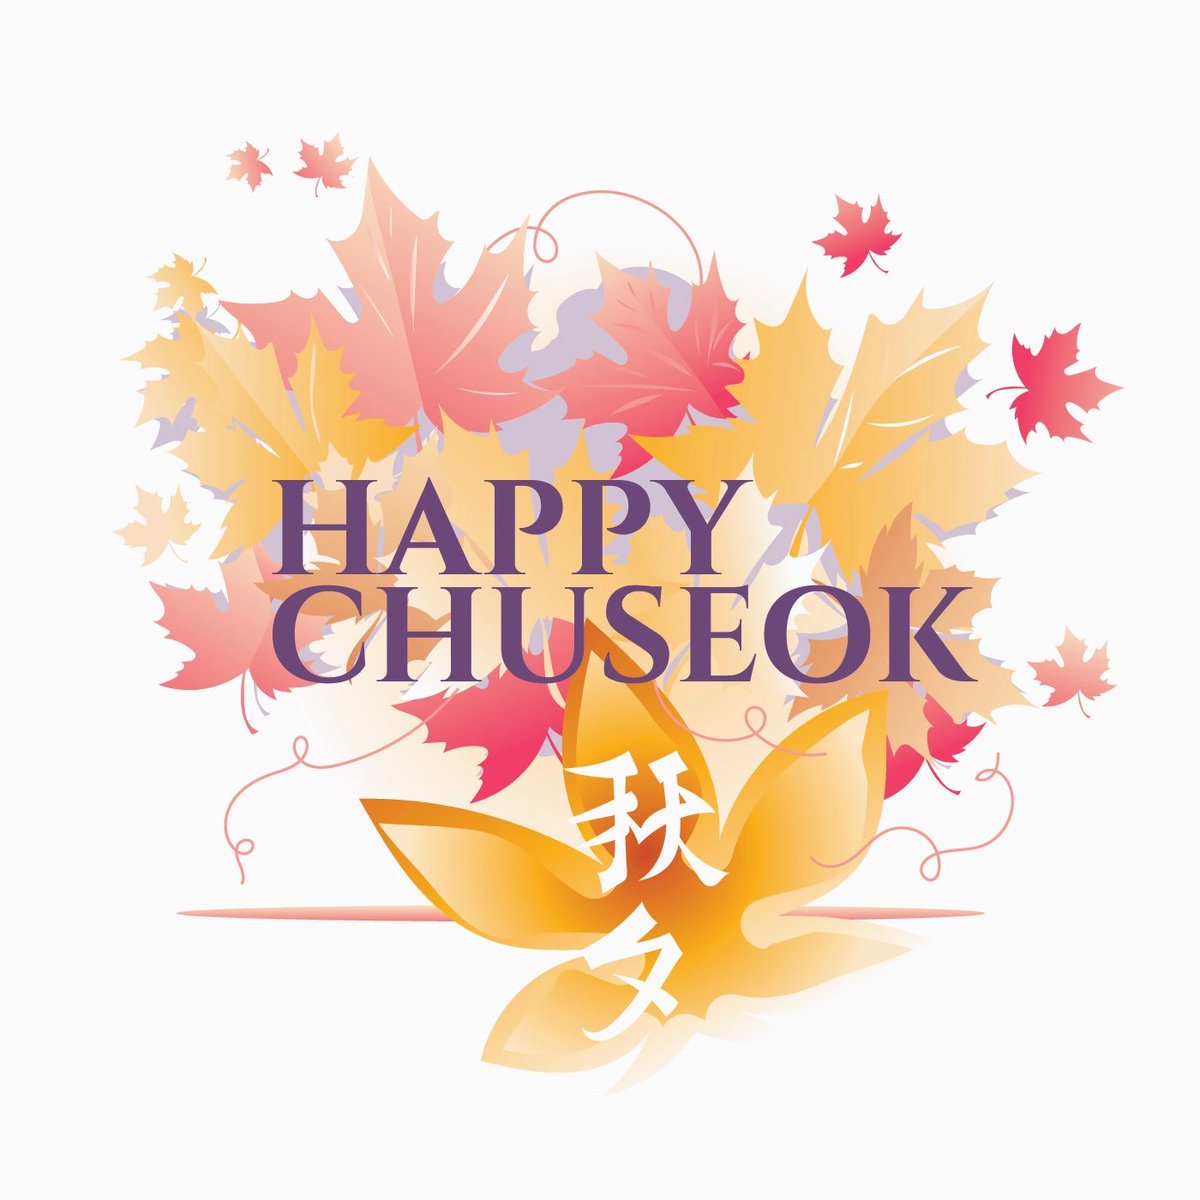 Happy Chuseok everyone! May the new year bring you happiness and fortune. 🫶 #CHUSEOK #KoreanThanksgivingDay #CryptoFamily